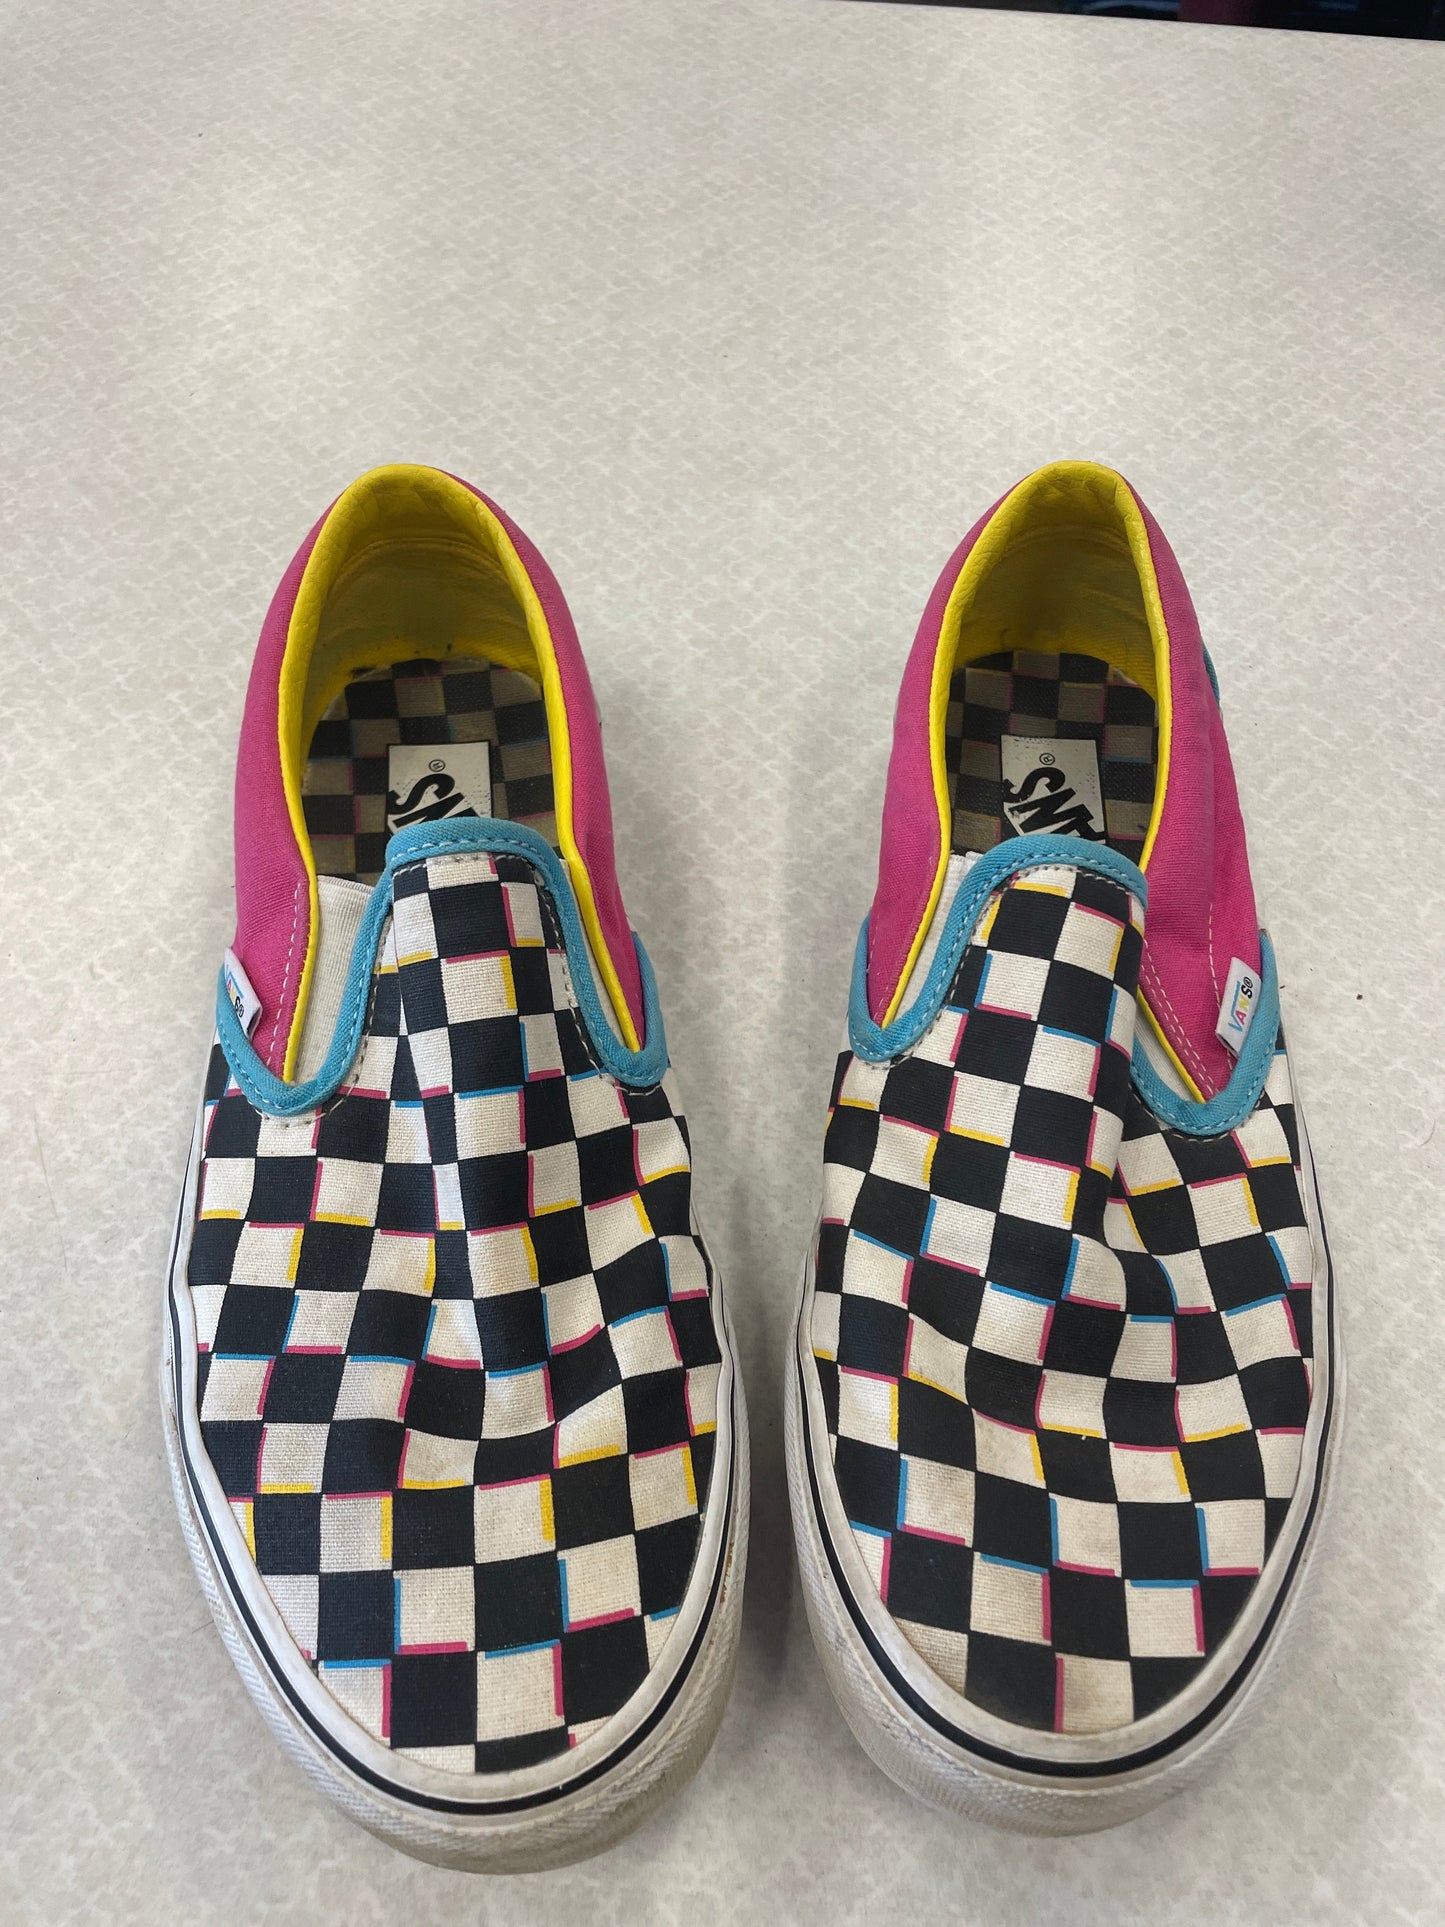 Checkered Pattern Shoes Flats Vans, Size 9.5